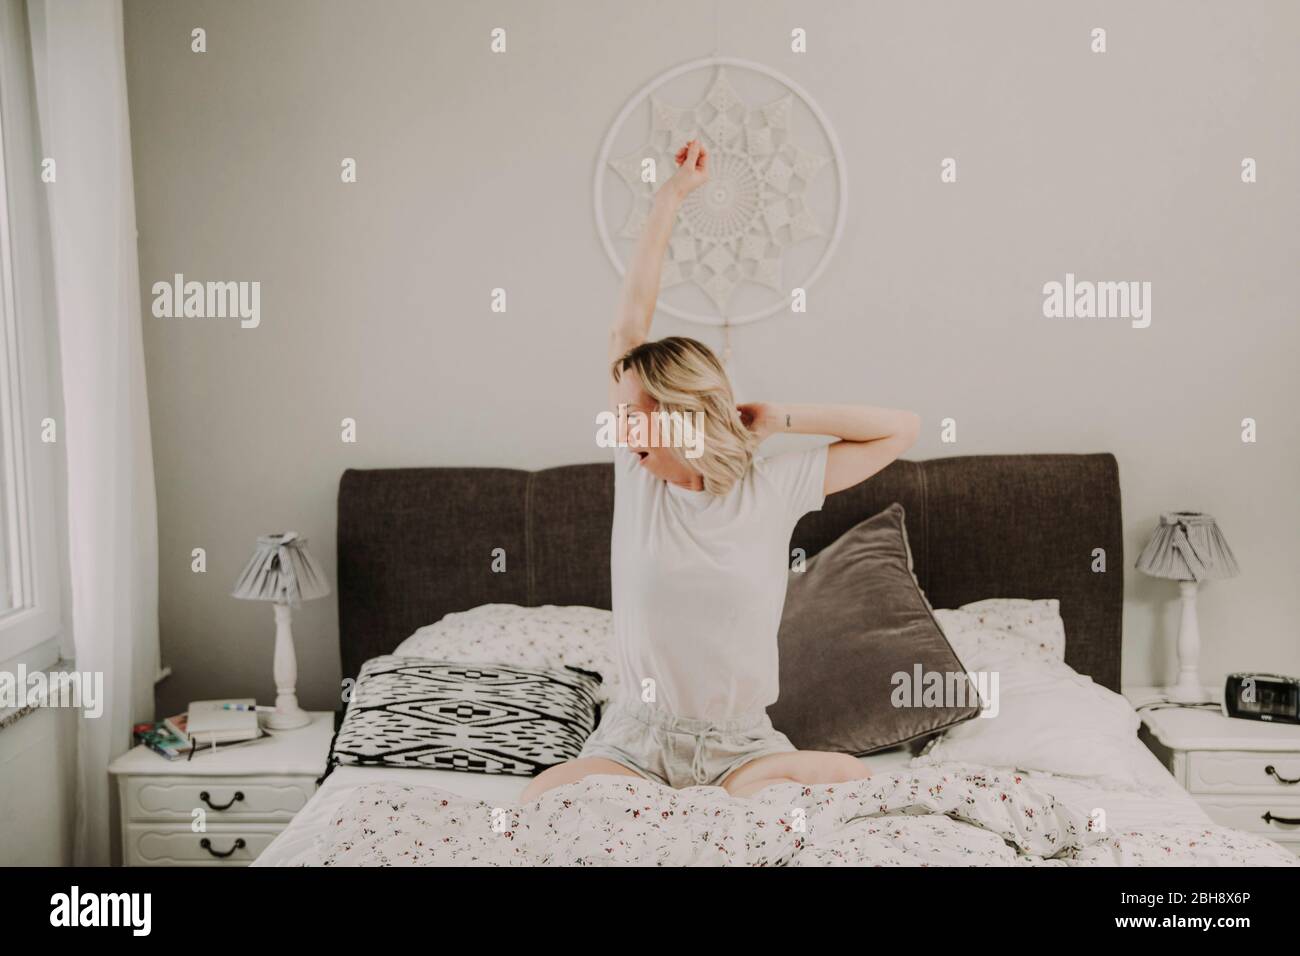 Woman sits in bed yawning and stretches Stock Photo